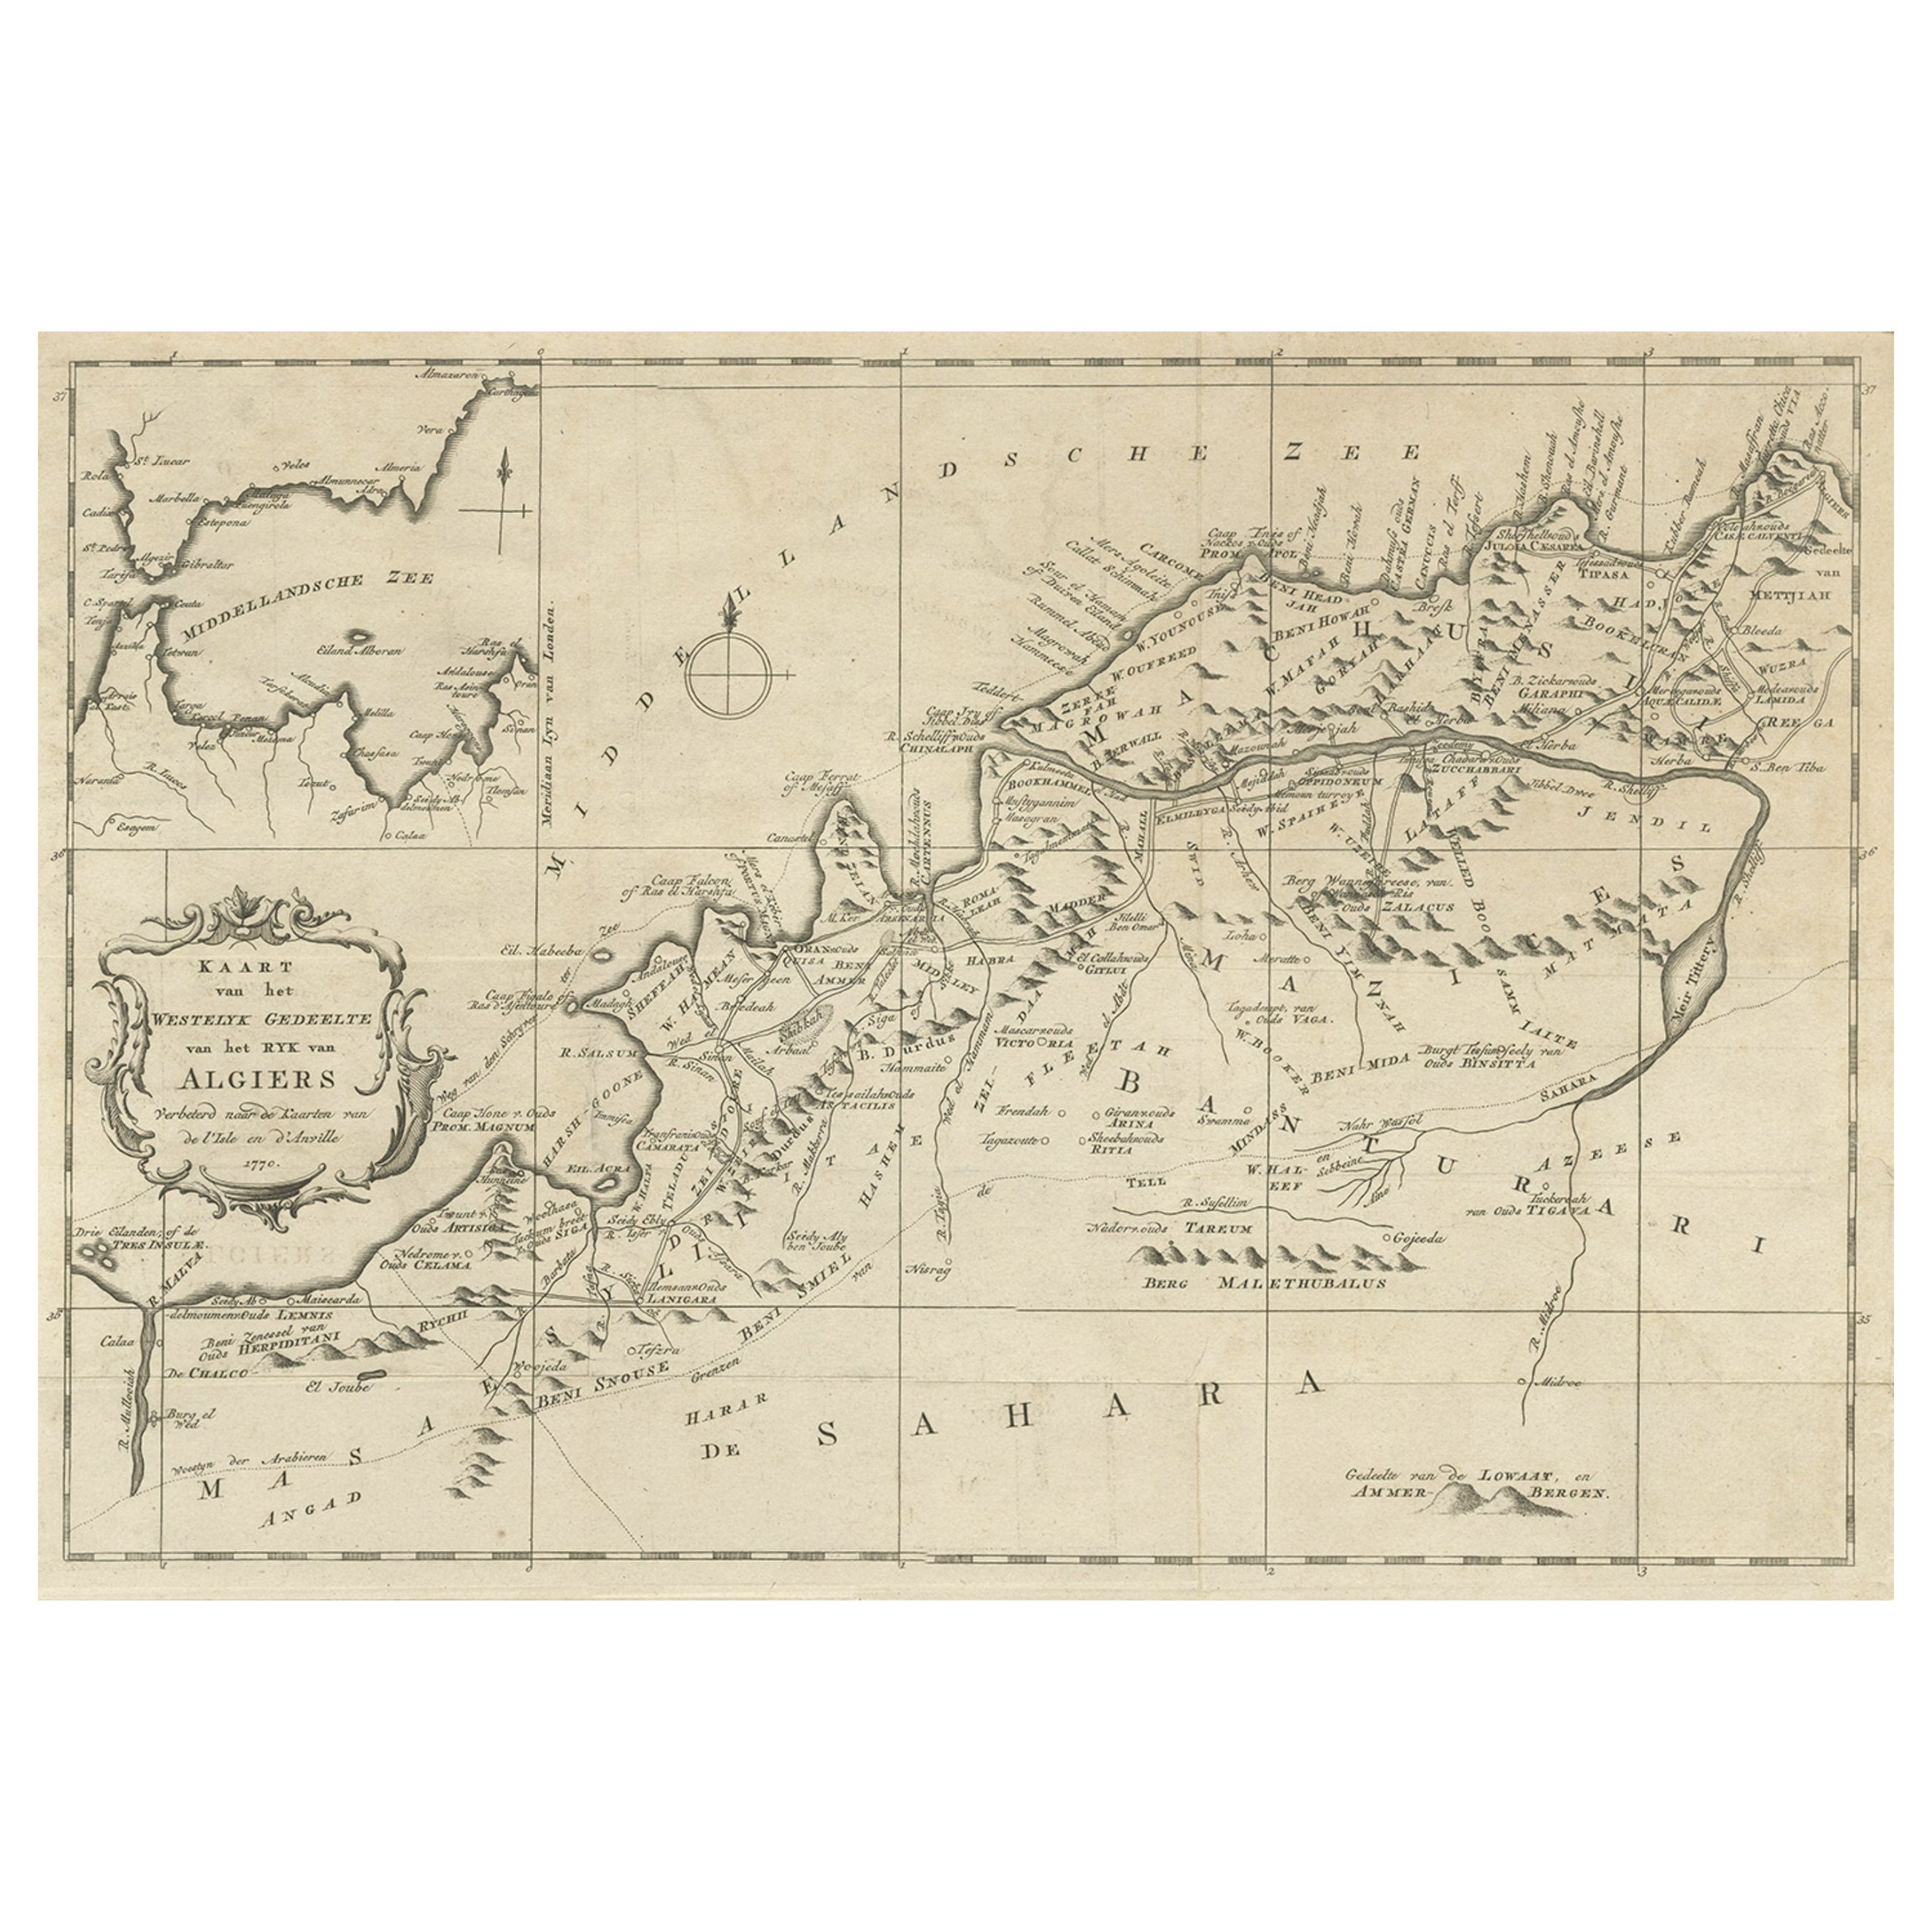 Old Map of the Western Region of the Kingdom of Algiers, Algeria, 1773 For Sale